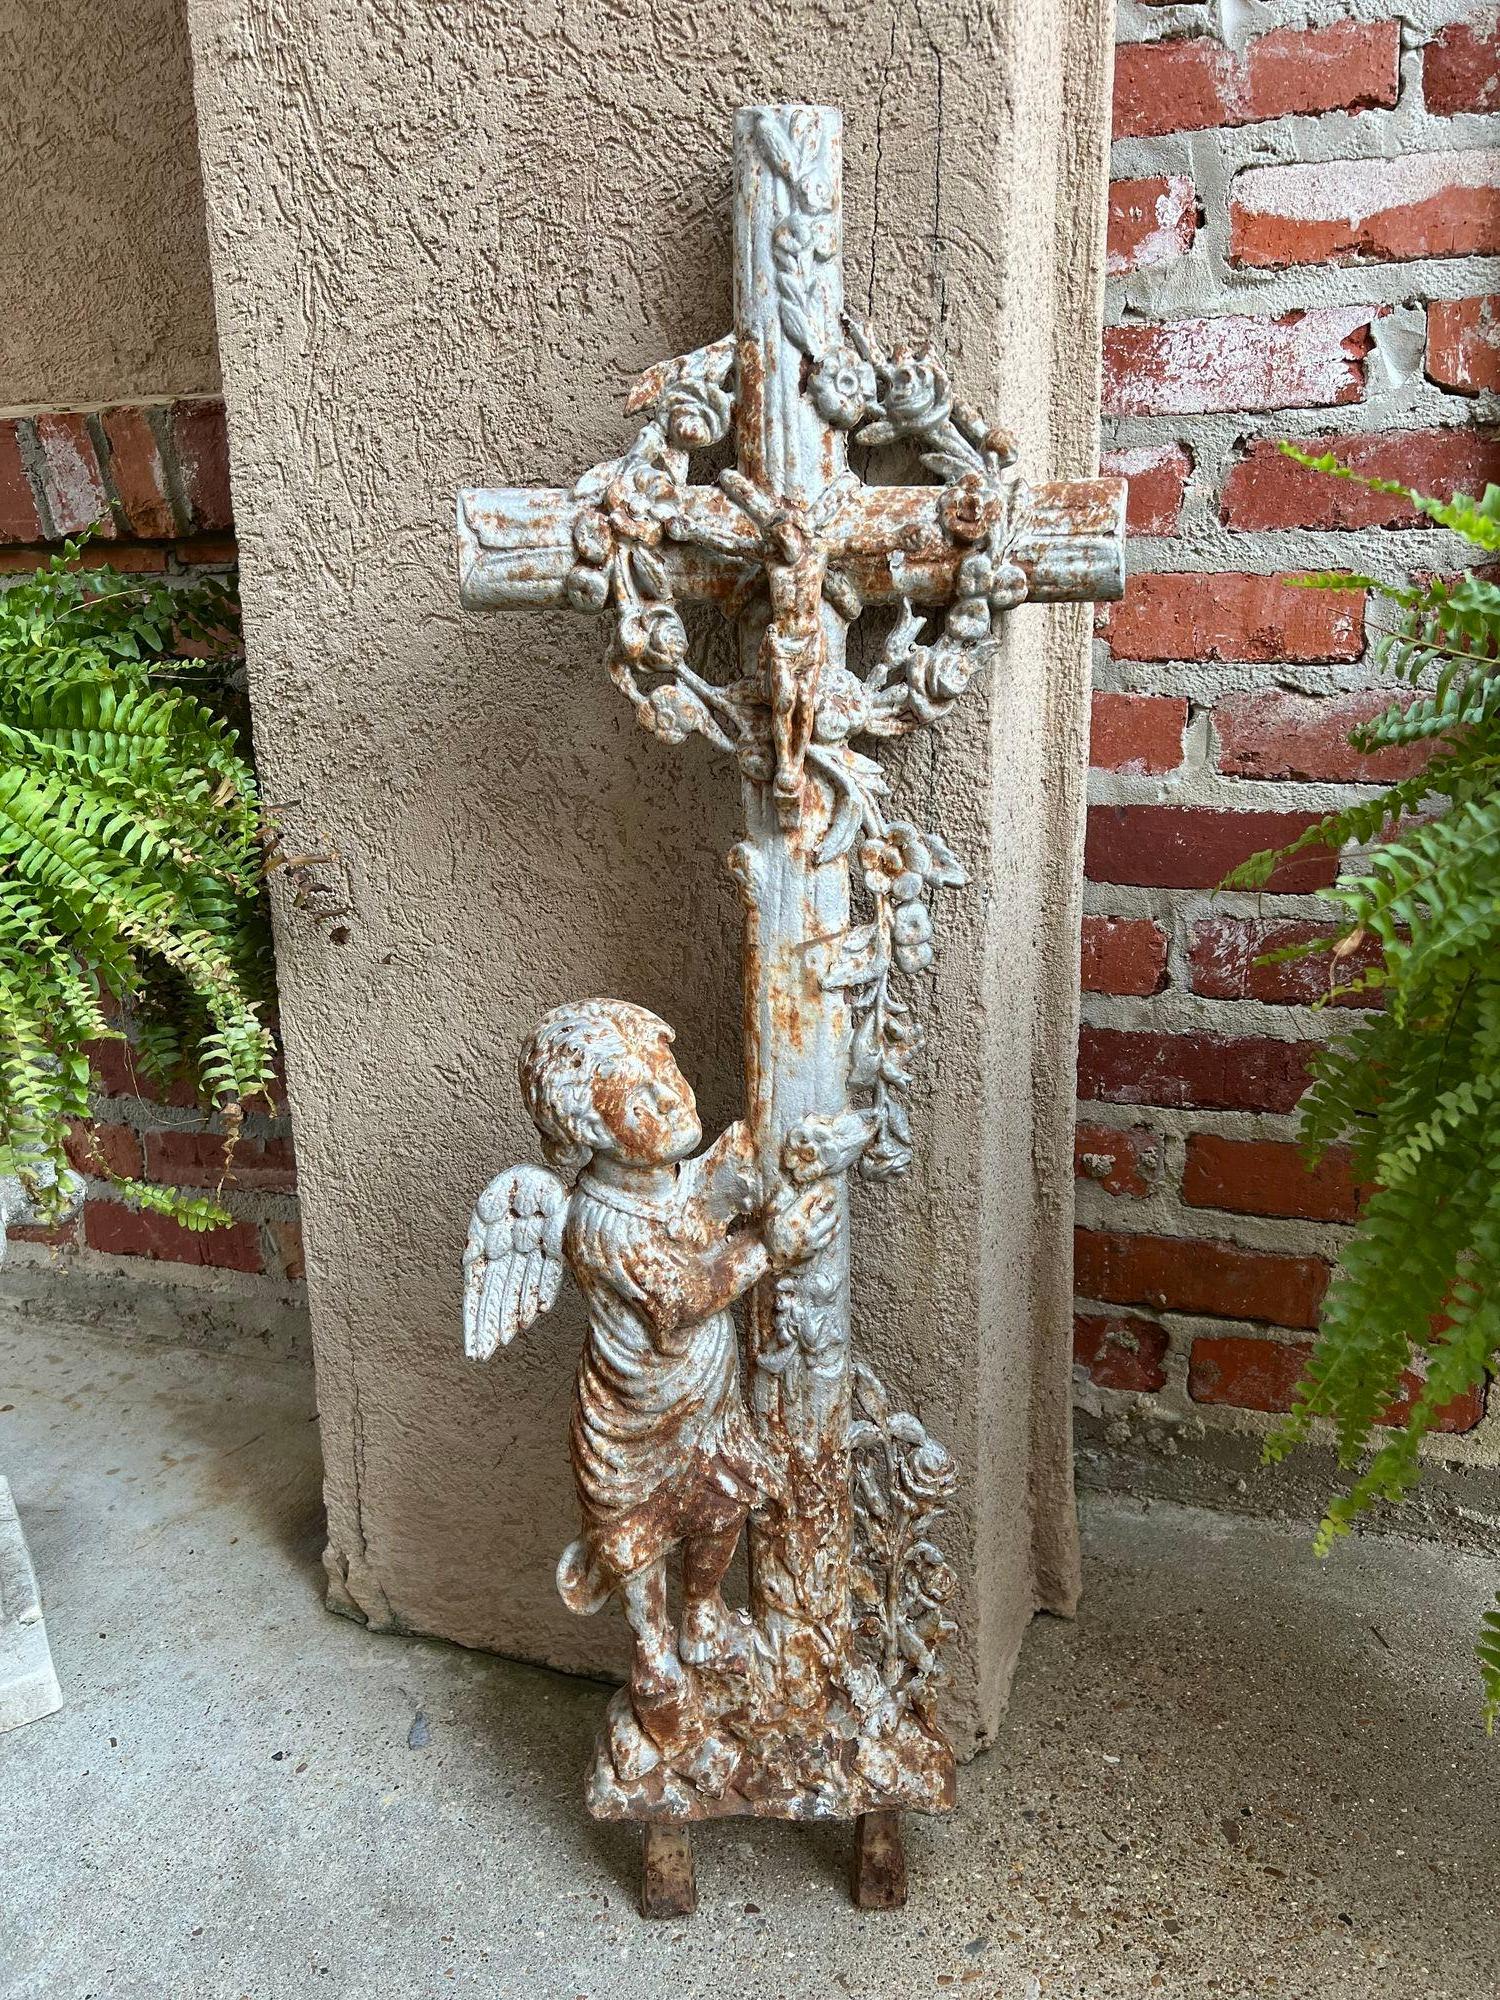 SMALL Antique French Cast Iron Cemetery Cross Crucifix Child Angel Garden Chapel.

Direct from France, a beautiful antique French cast-iron cemetery cross, in a SMALL SIZE with fabulous details throughout, including a full figure angel/cherub with